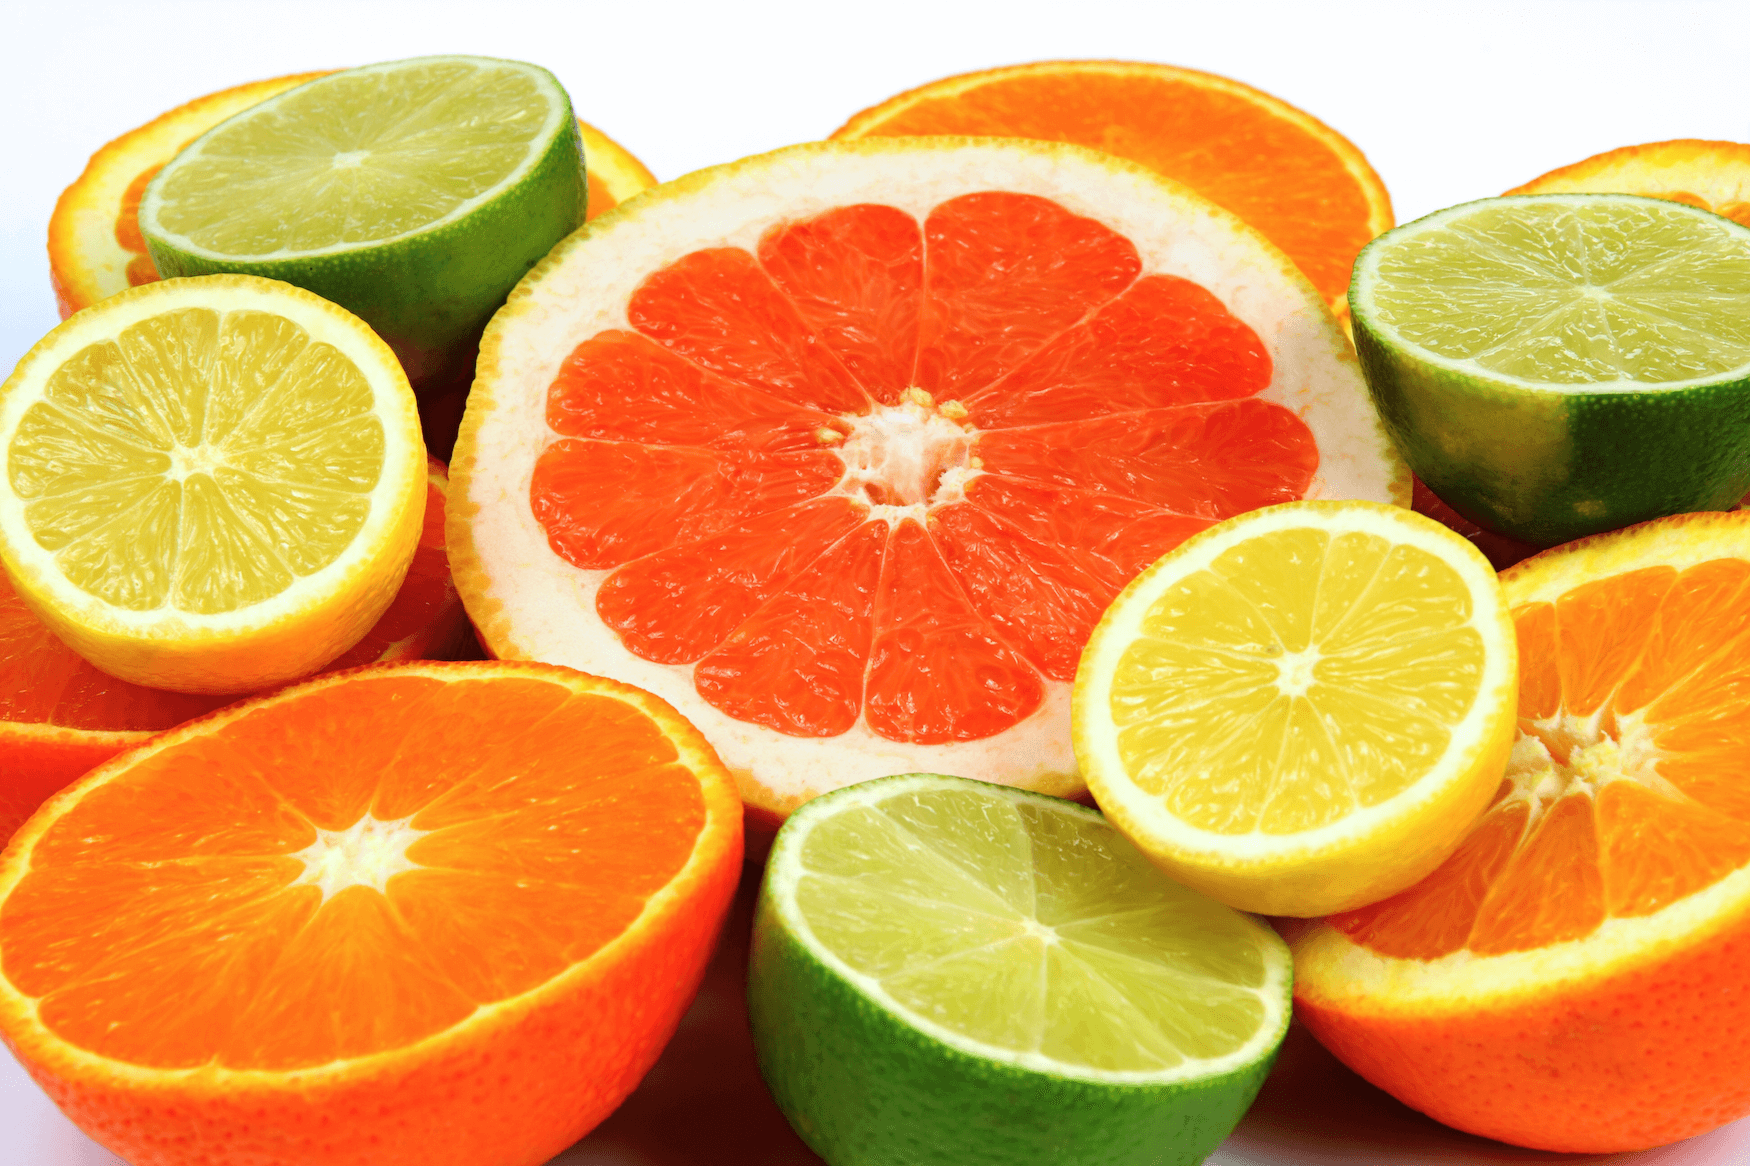 How Does Vitamin C Help with Cancer?